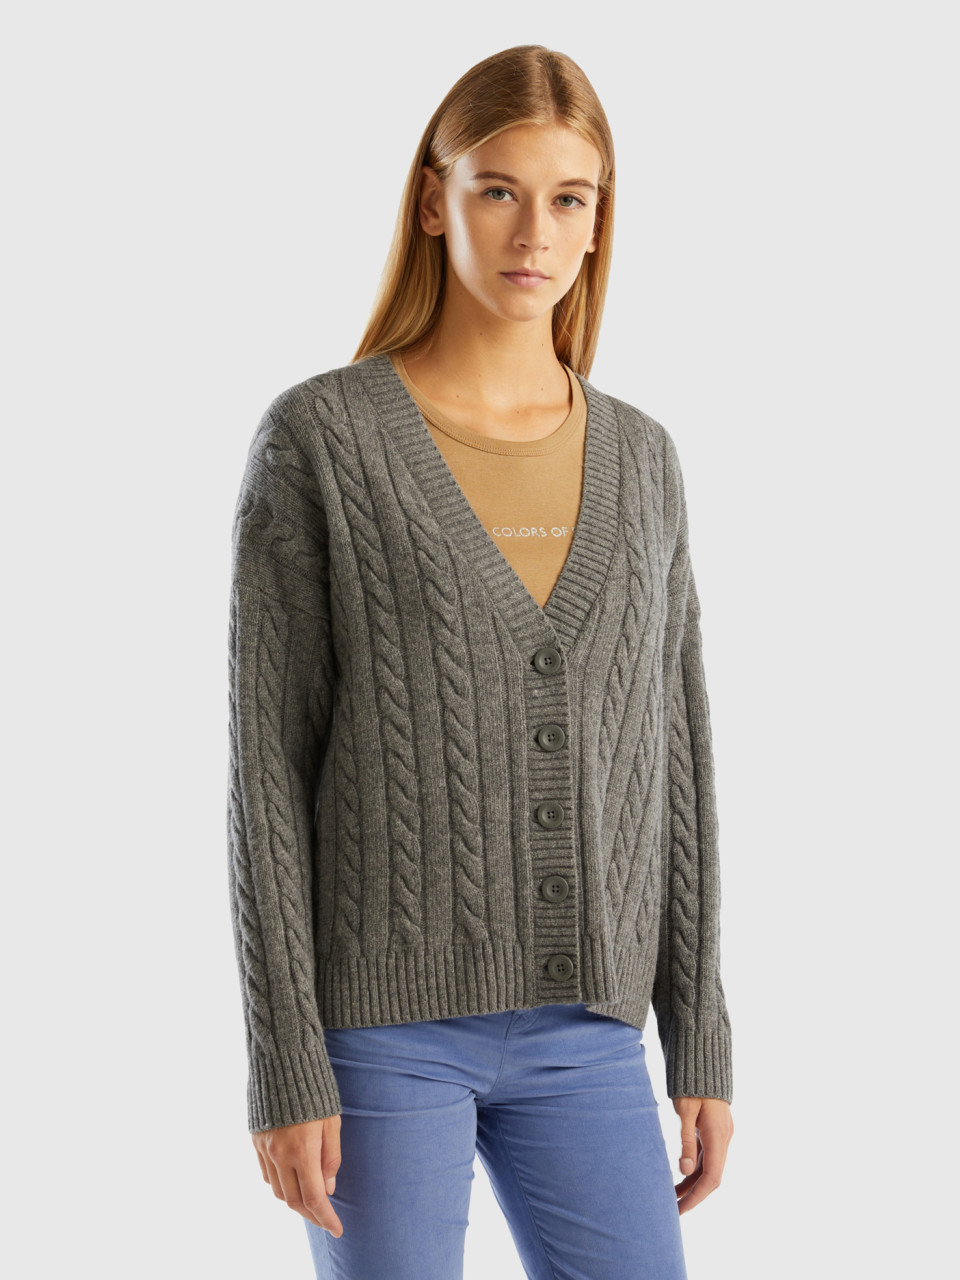 Benetton, Oversized Fit Cardigan With Cables, Dark Gray, Women